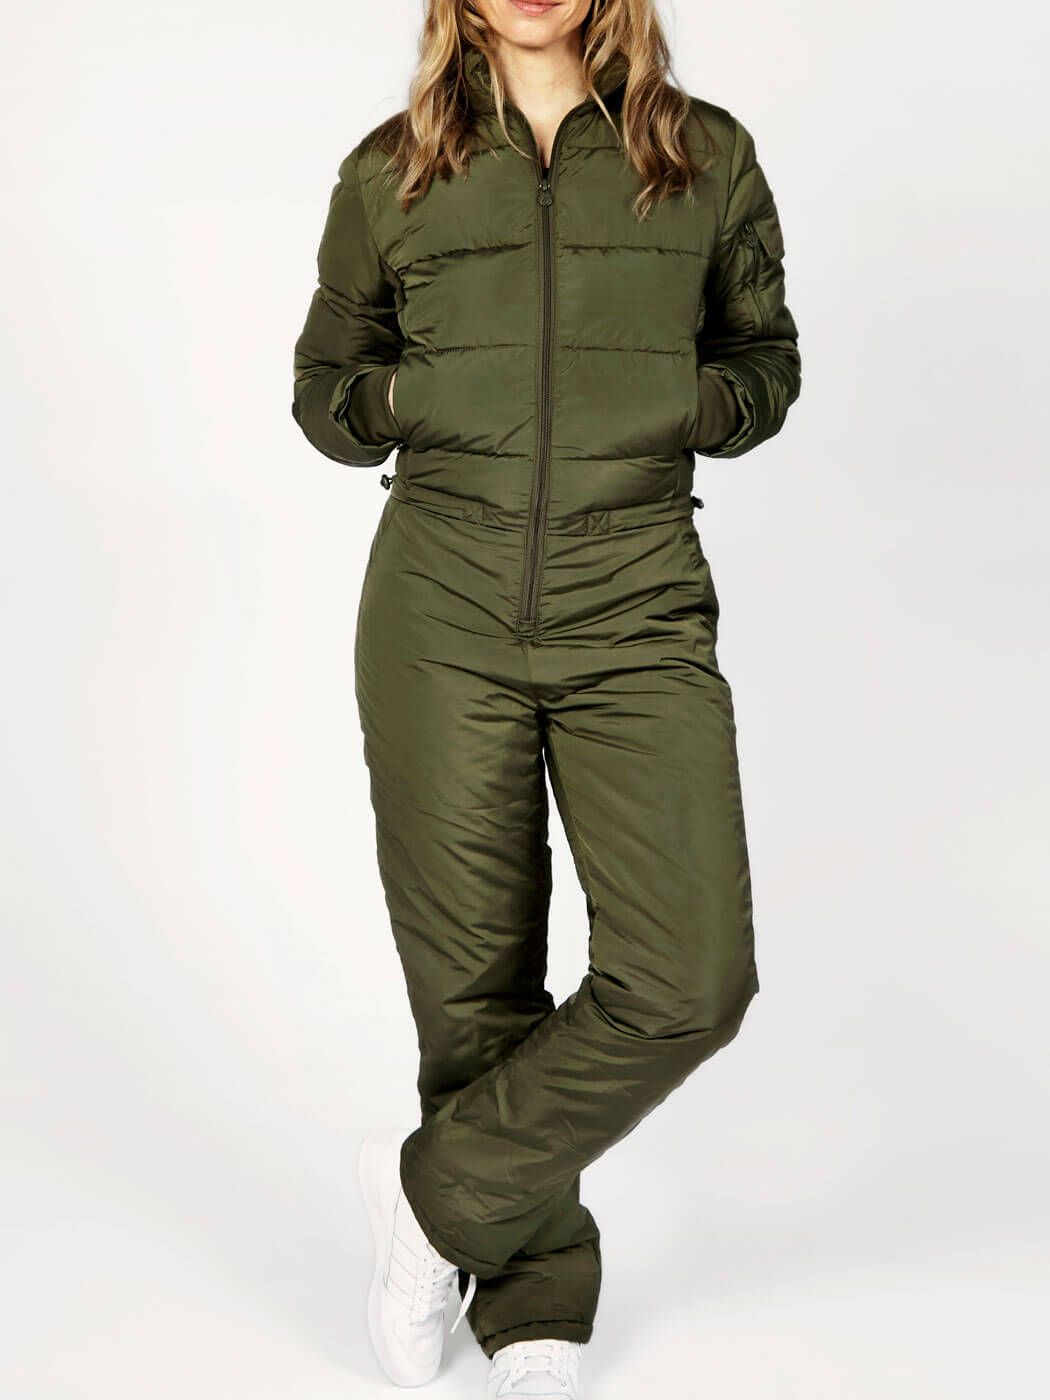 green-overall-winter-for-ladies-at-the-dalset-danish-design